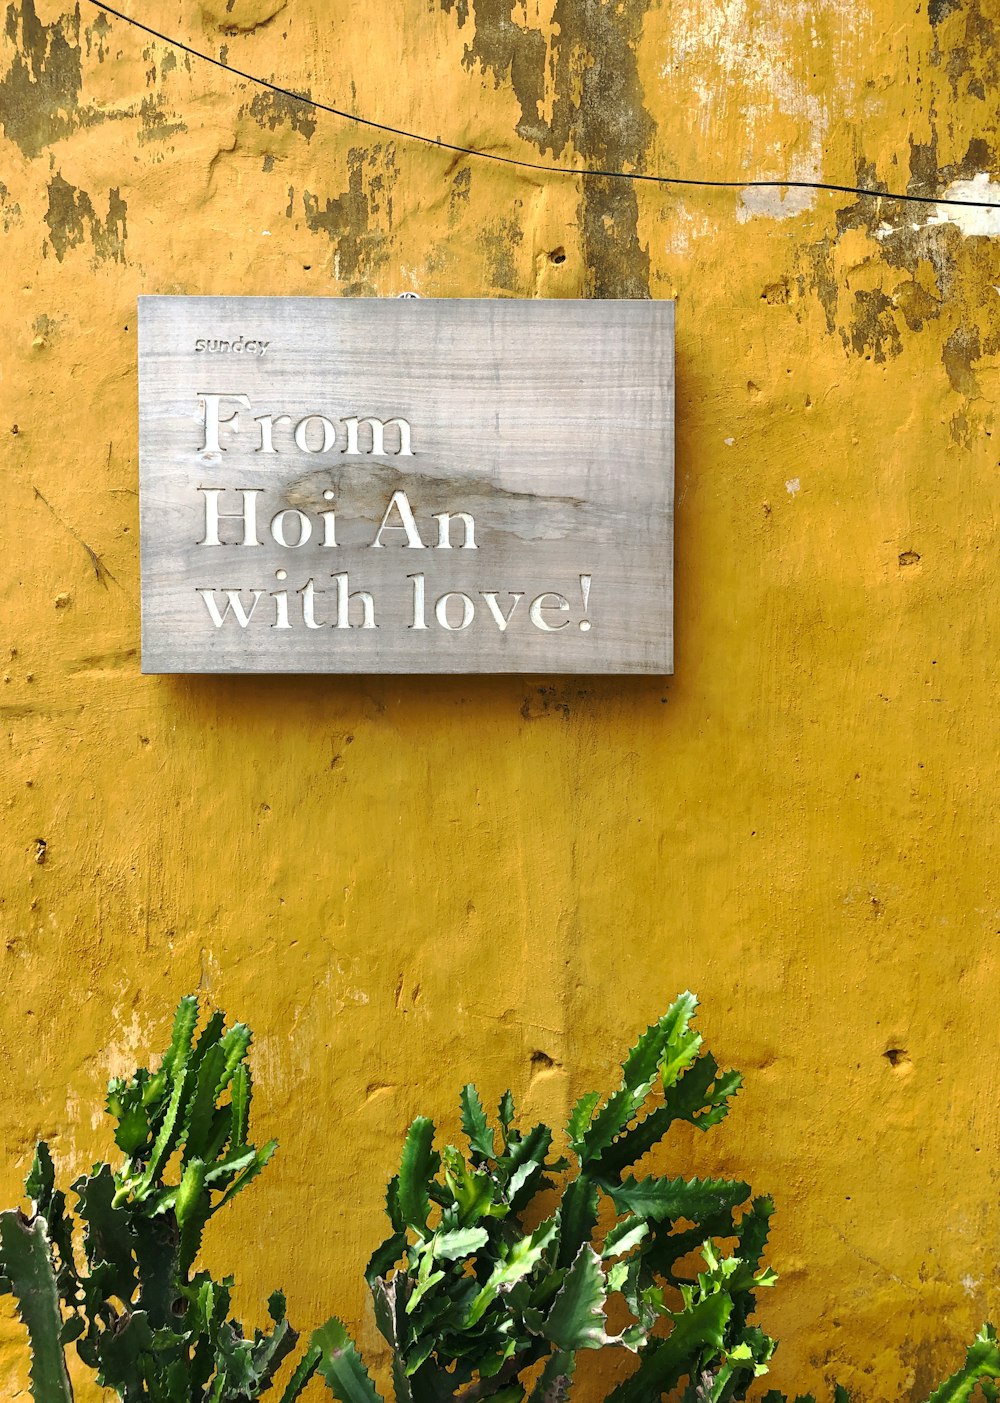 from hoi an with love